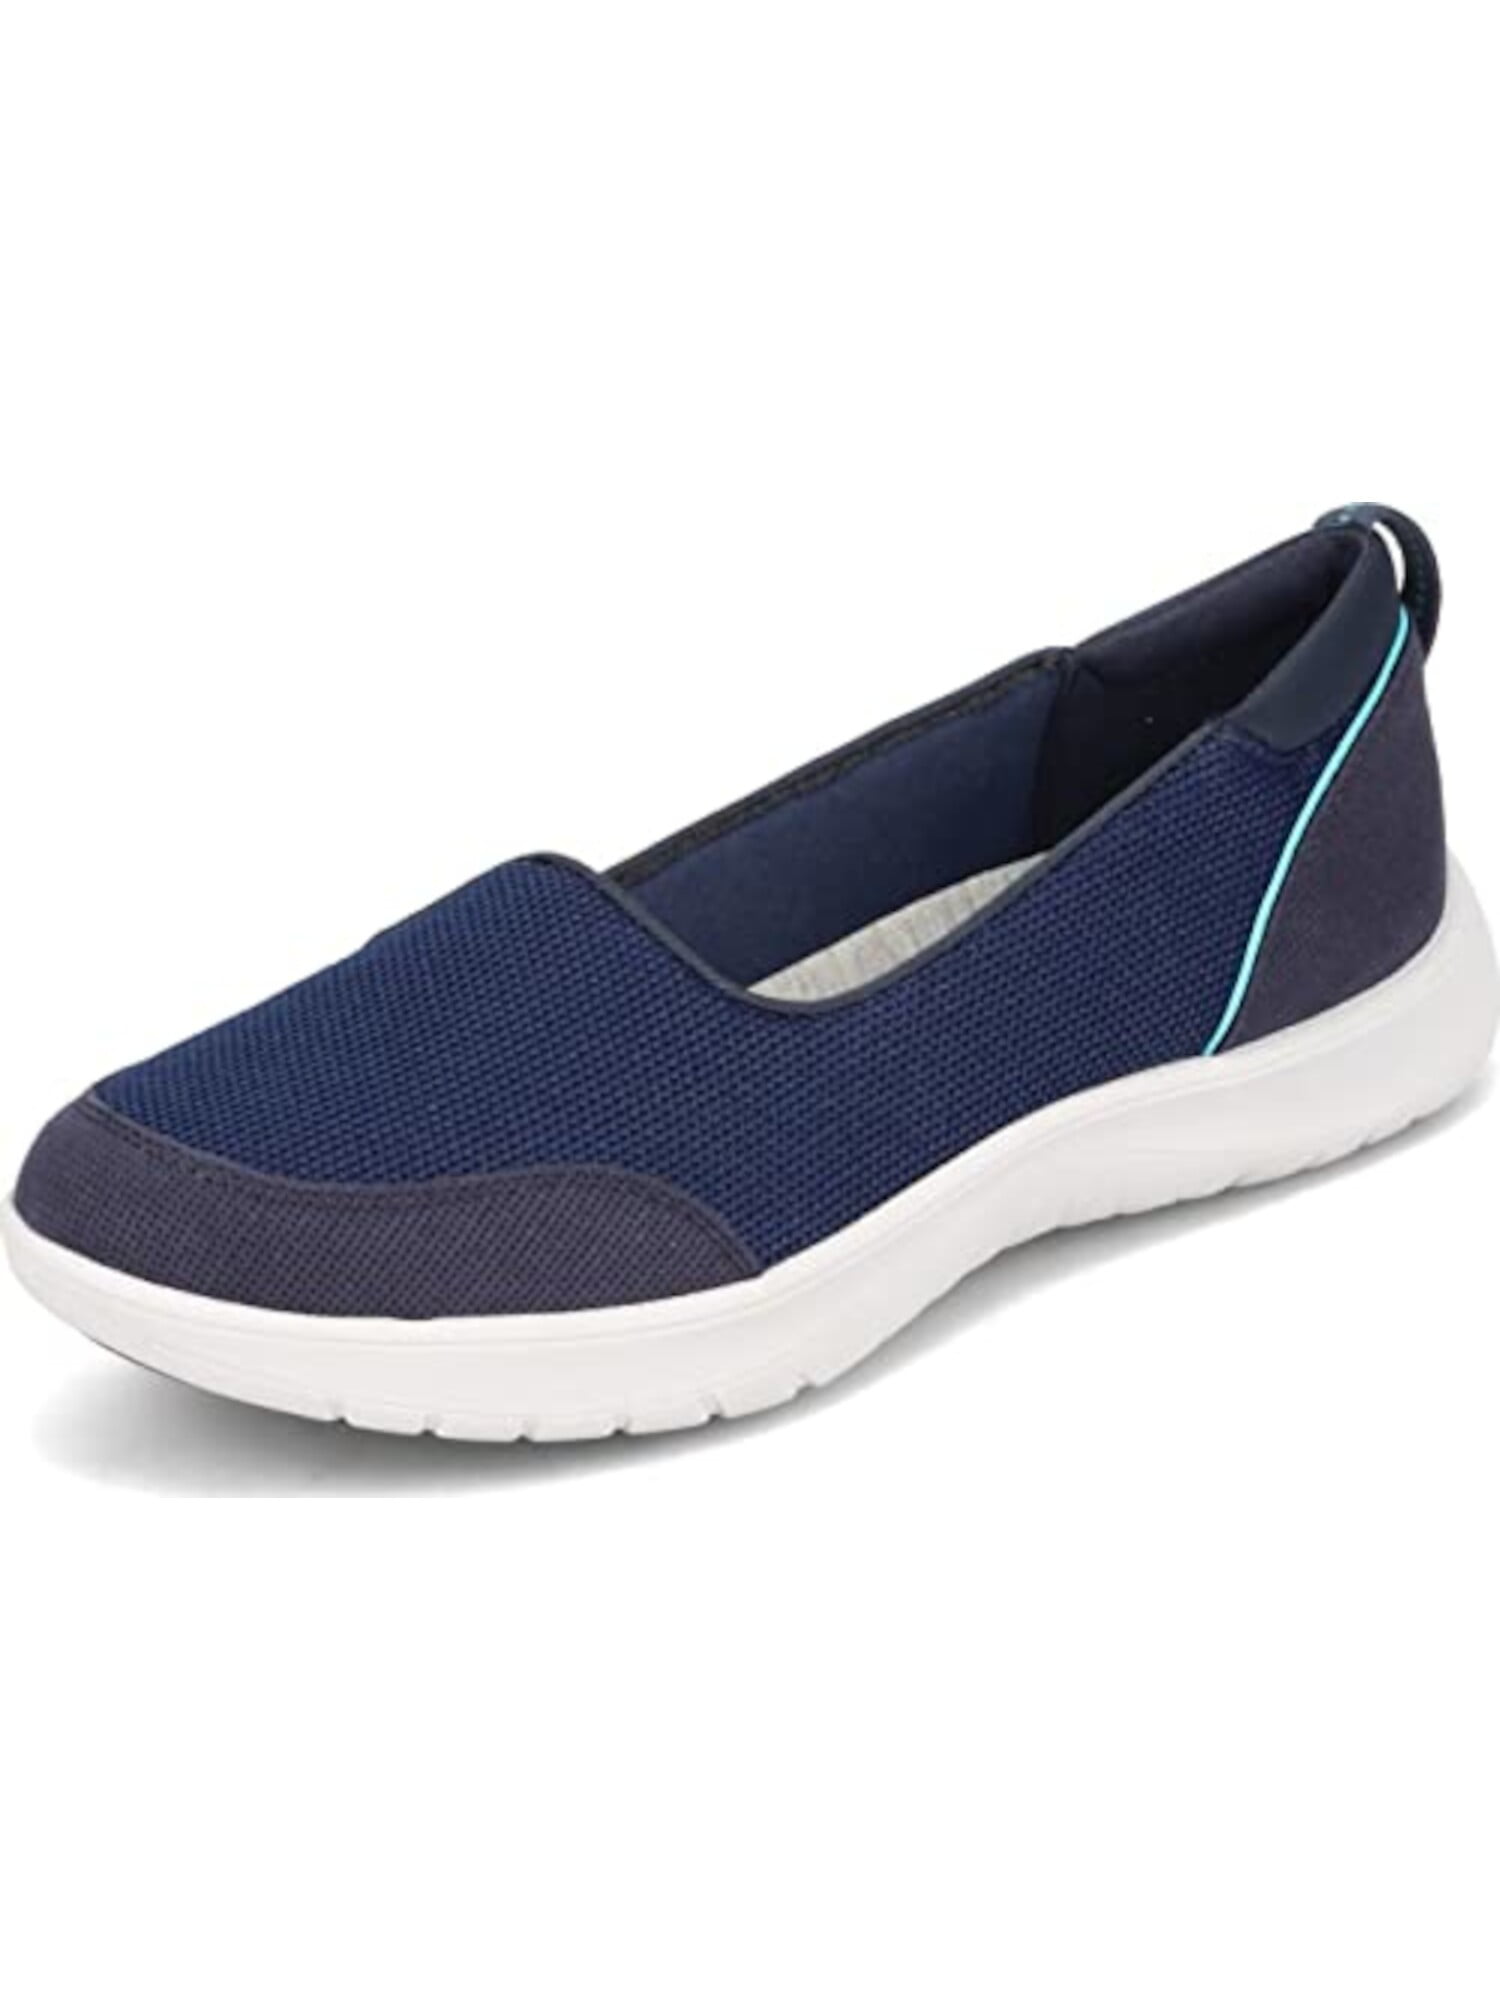 CLOUD STEPPERS BY CLARKS Womens Navy 1/2